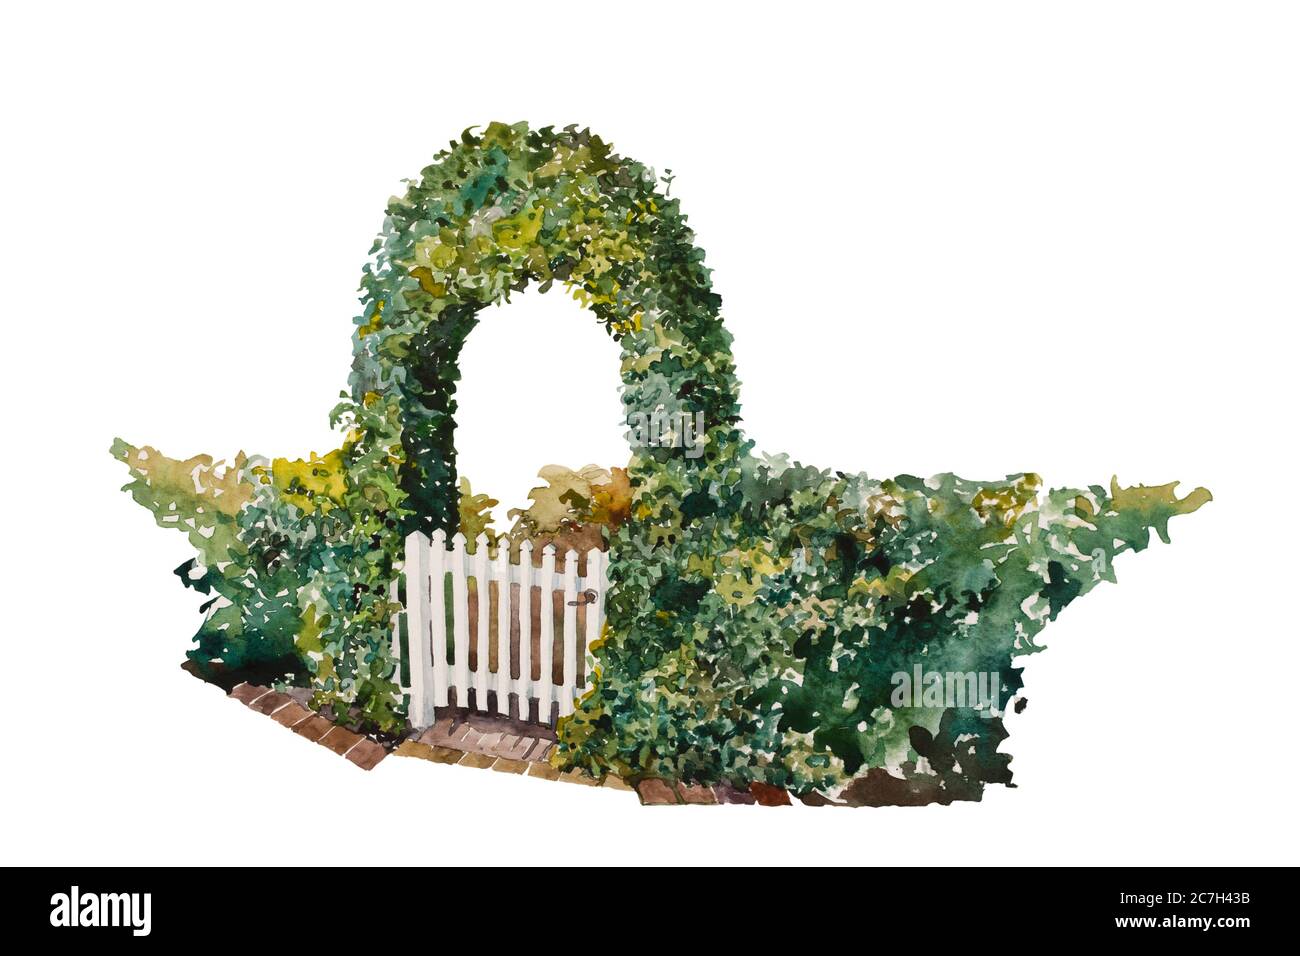 Watercolor romantic ivy gate over the house entrance, with part of green fence. Hand painted garden design element, isolated on white background Stock Photo